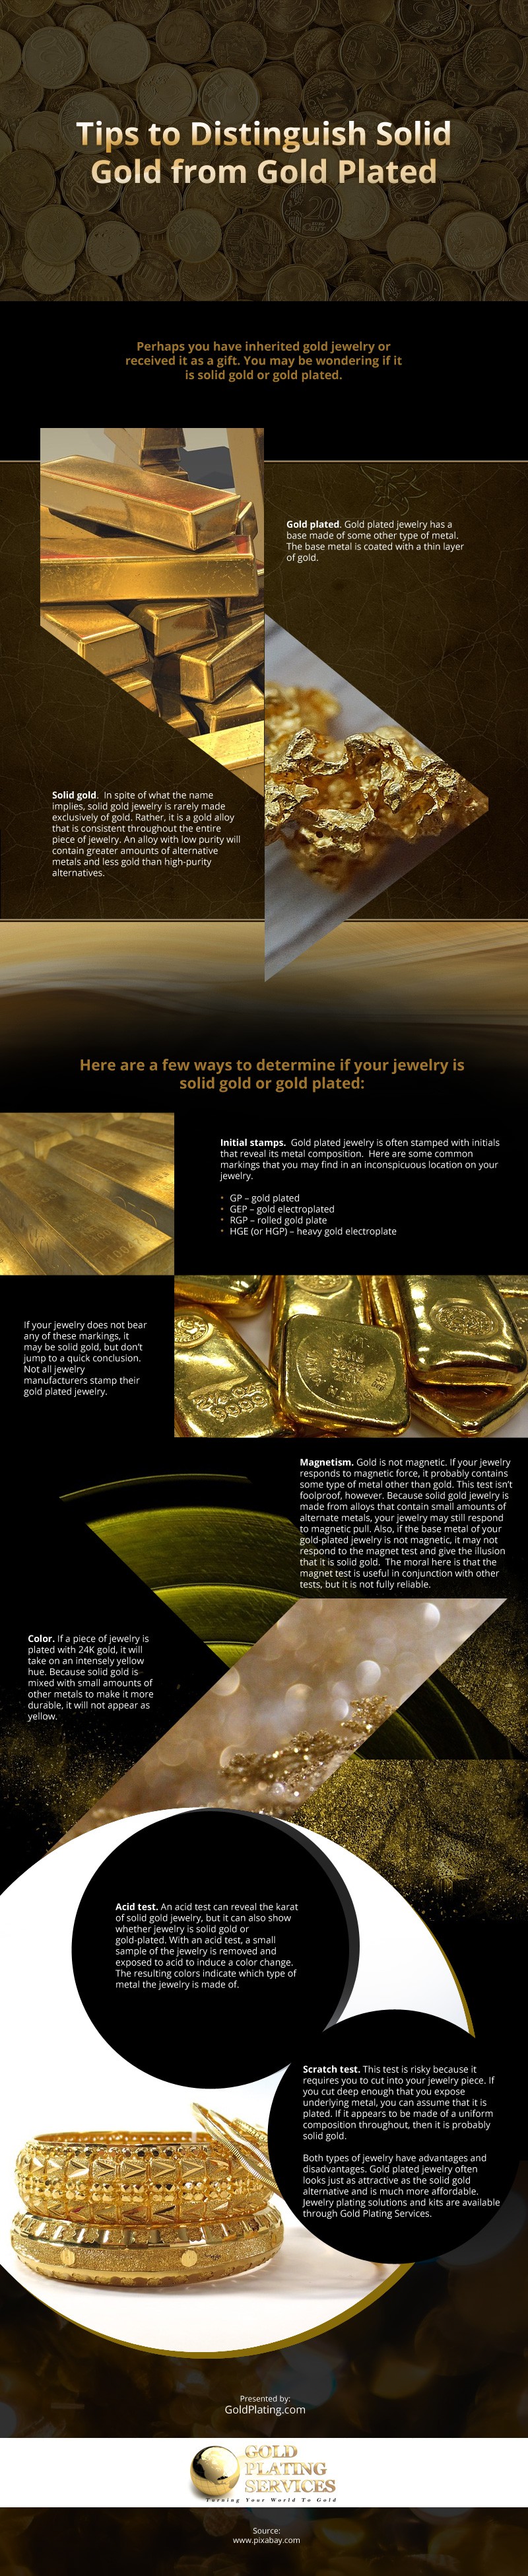 Tips-to-Distinguish-Solid-Gold-from-Gold-Plated Infographic